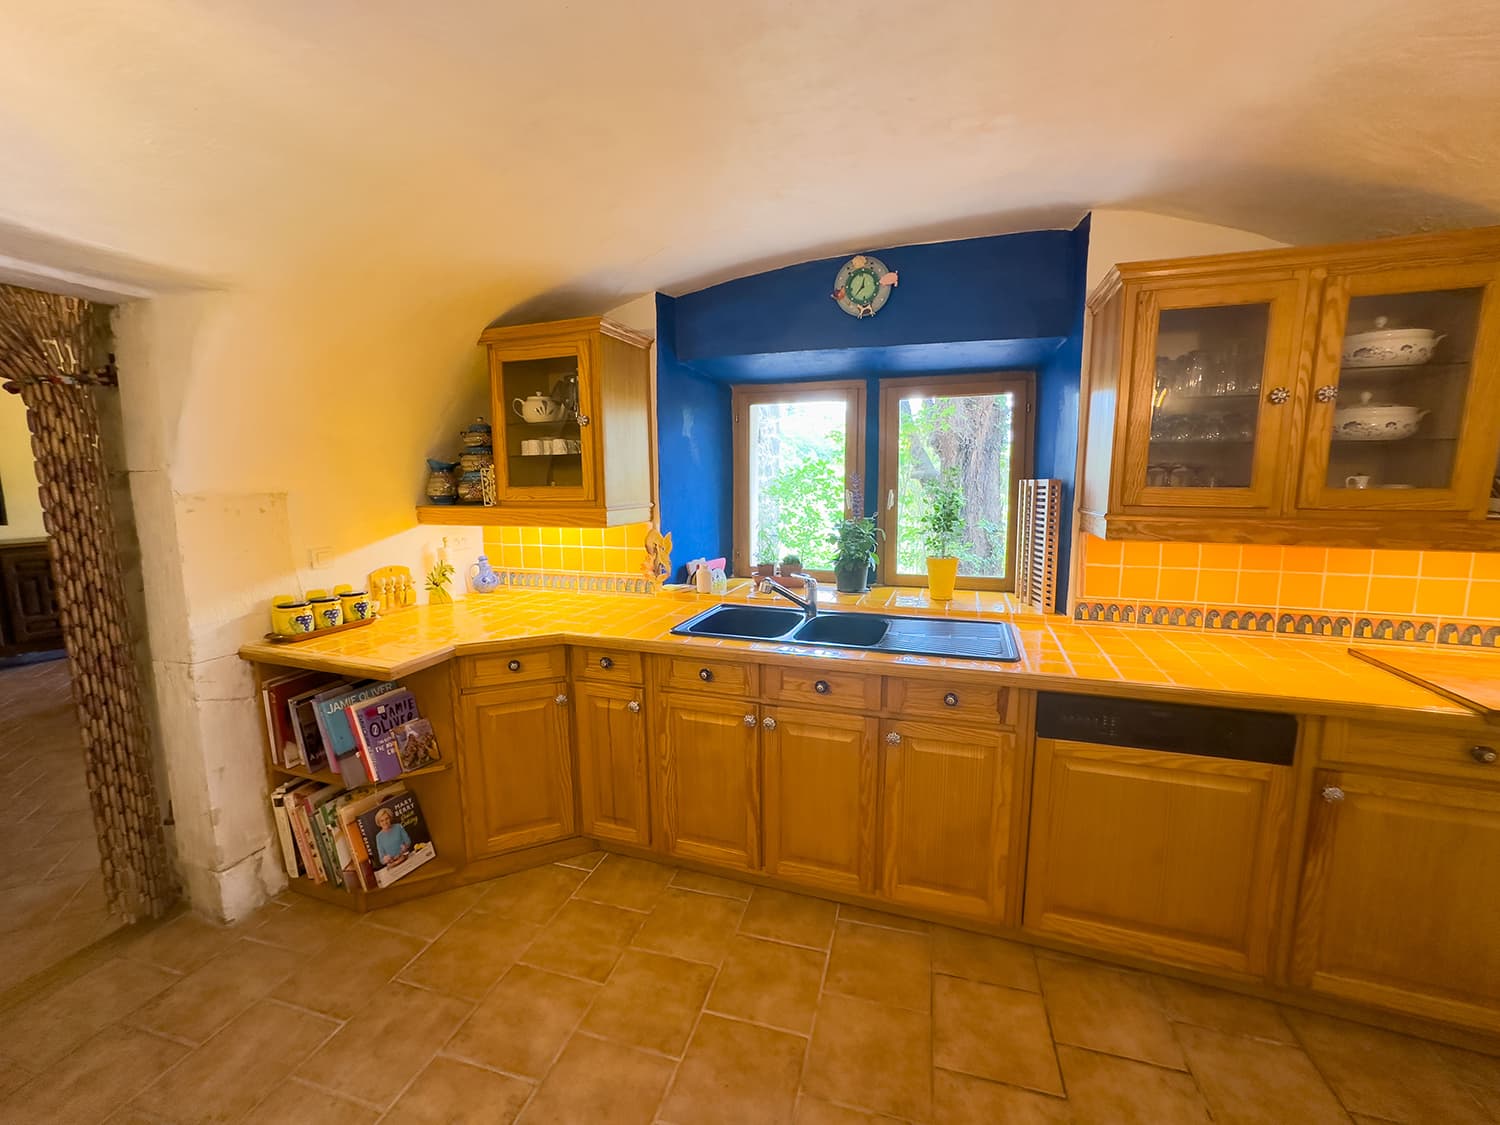 Kitchen | Holiday home in Gard, South of France